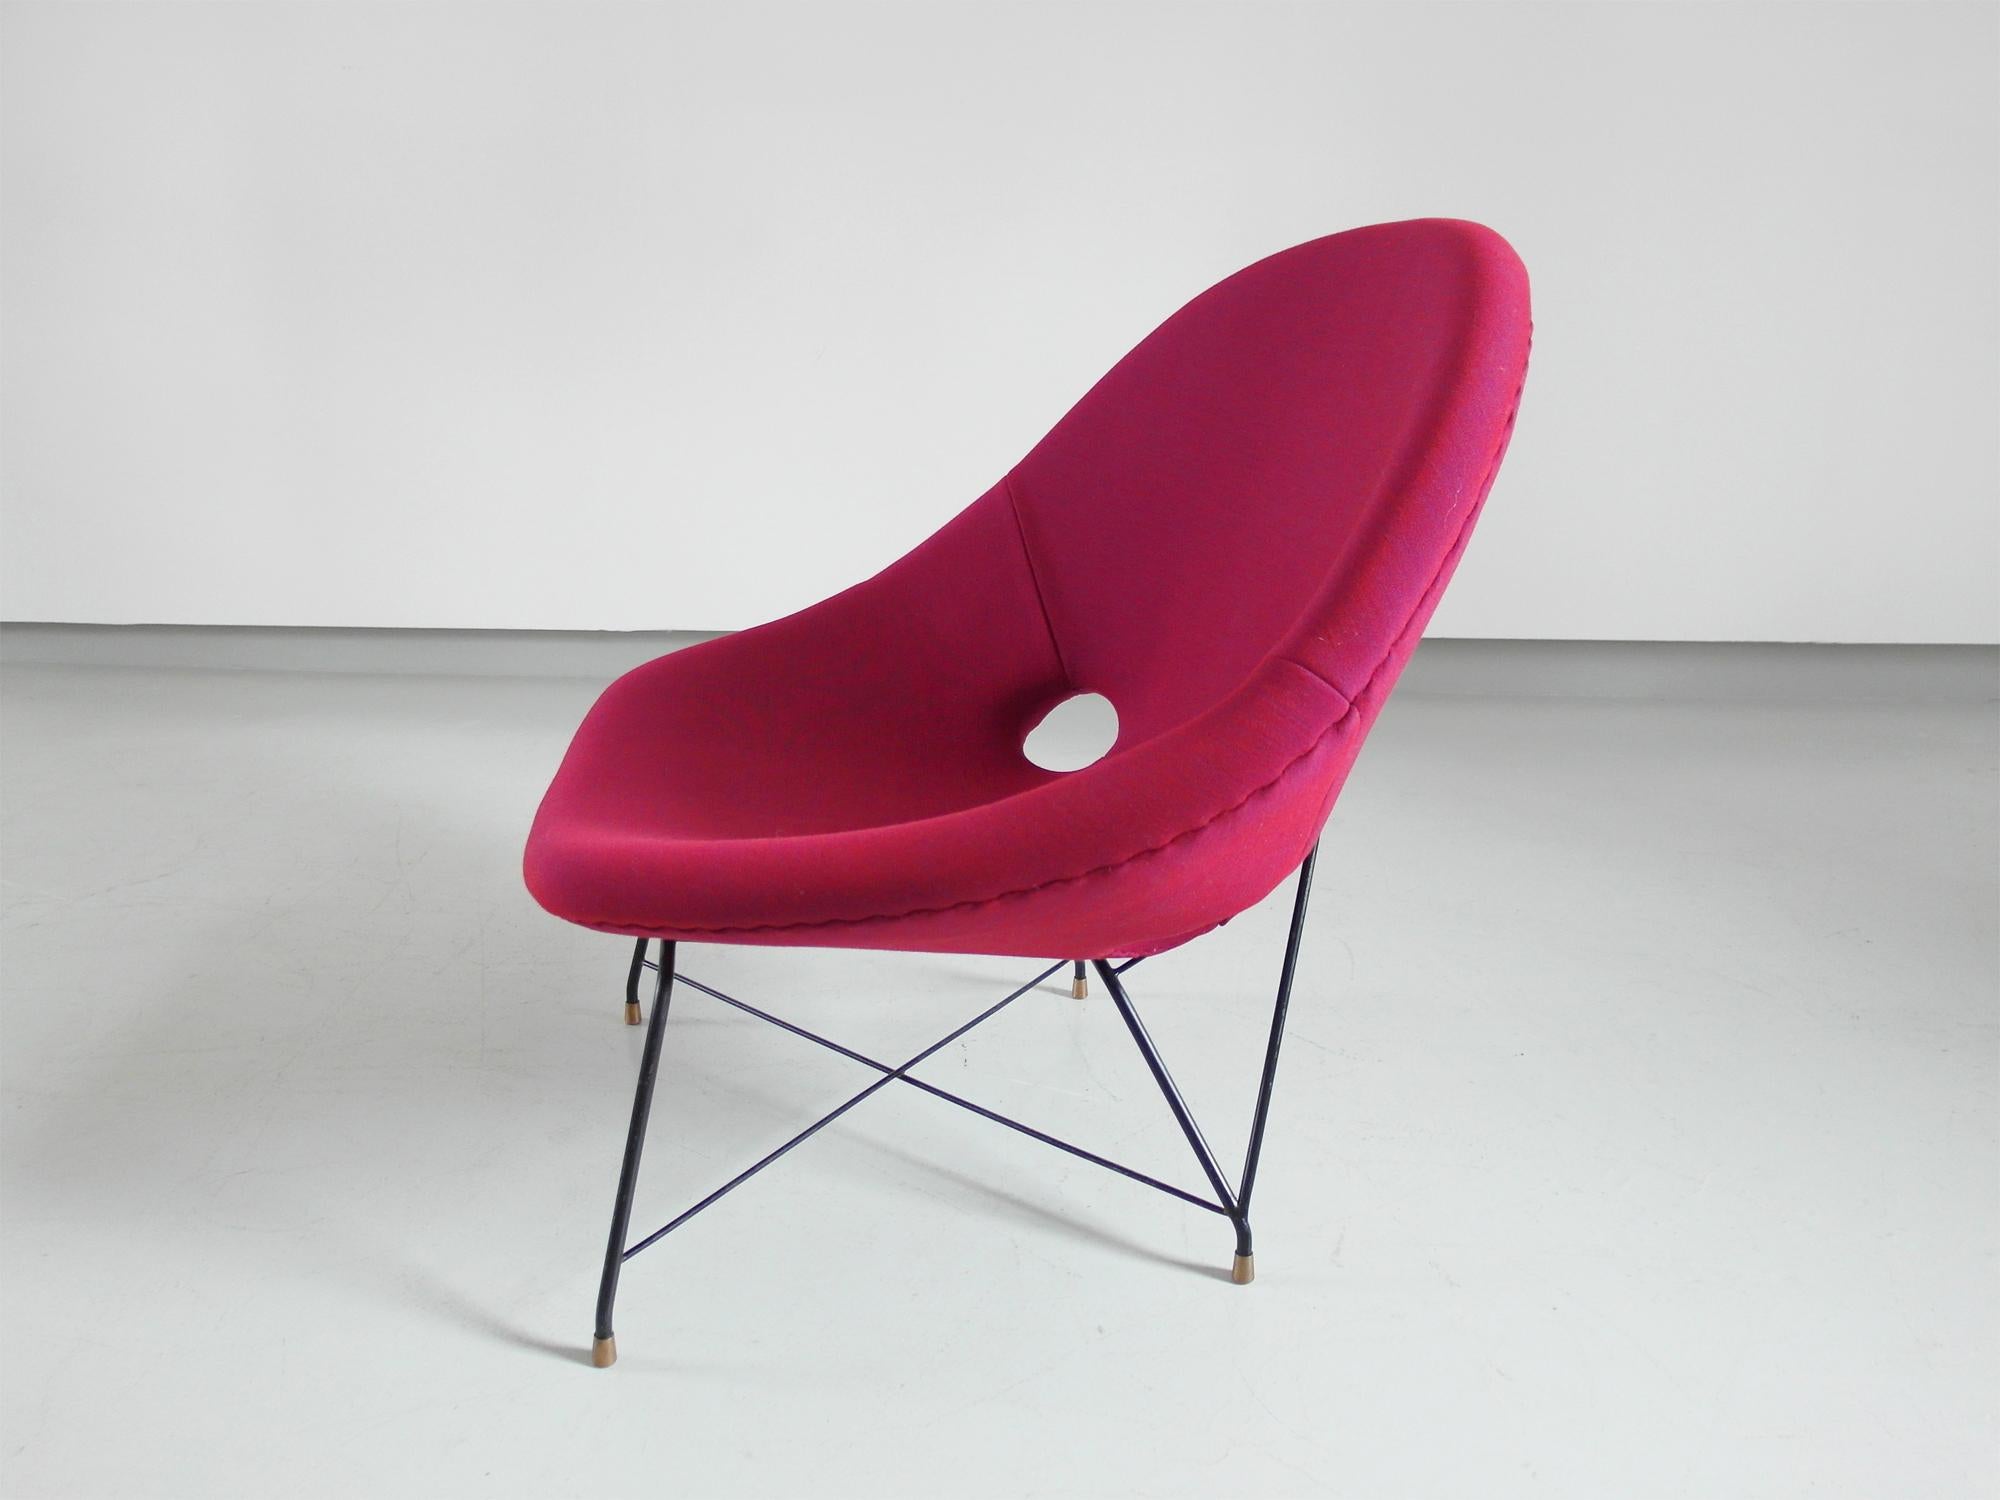 Pair of Cosmos Chairs in Ruby red/ Raspberry red by Augusto Bozzi for Saporiti For Sale 4